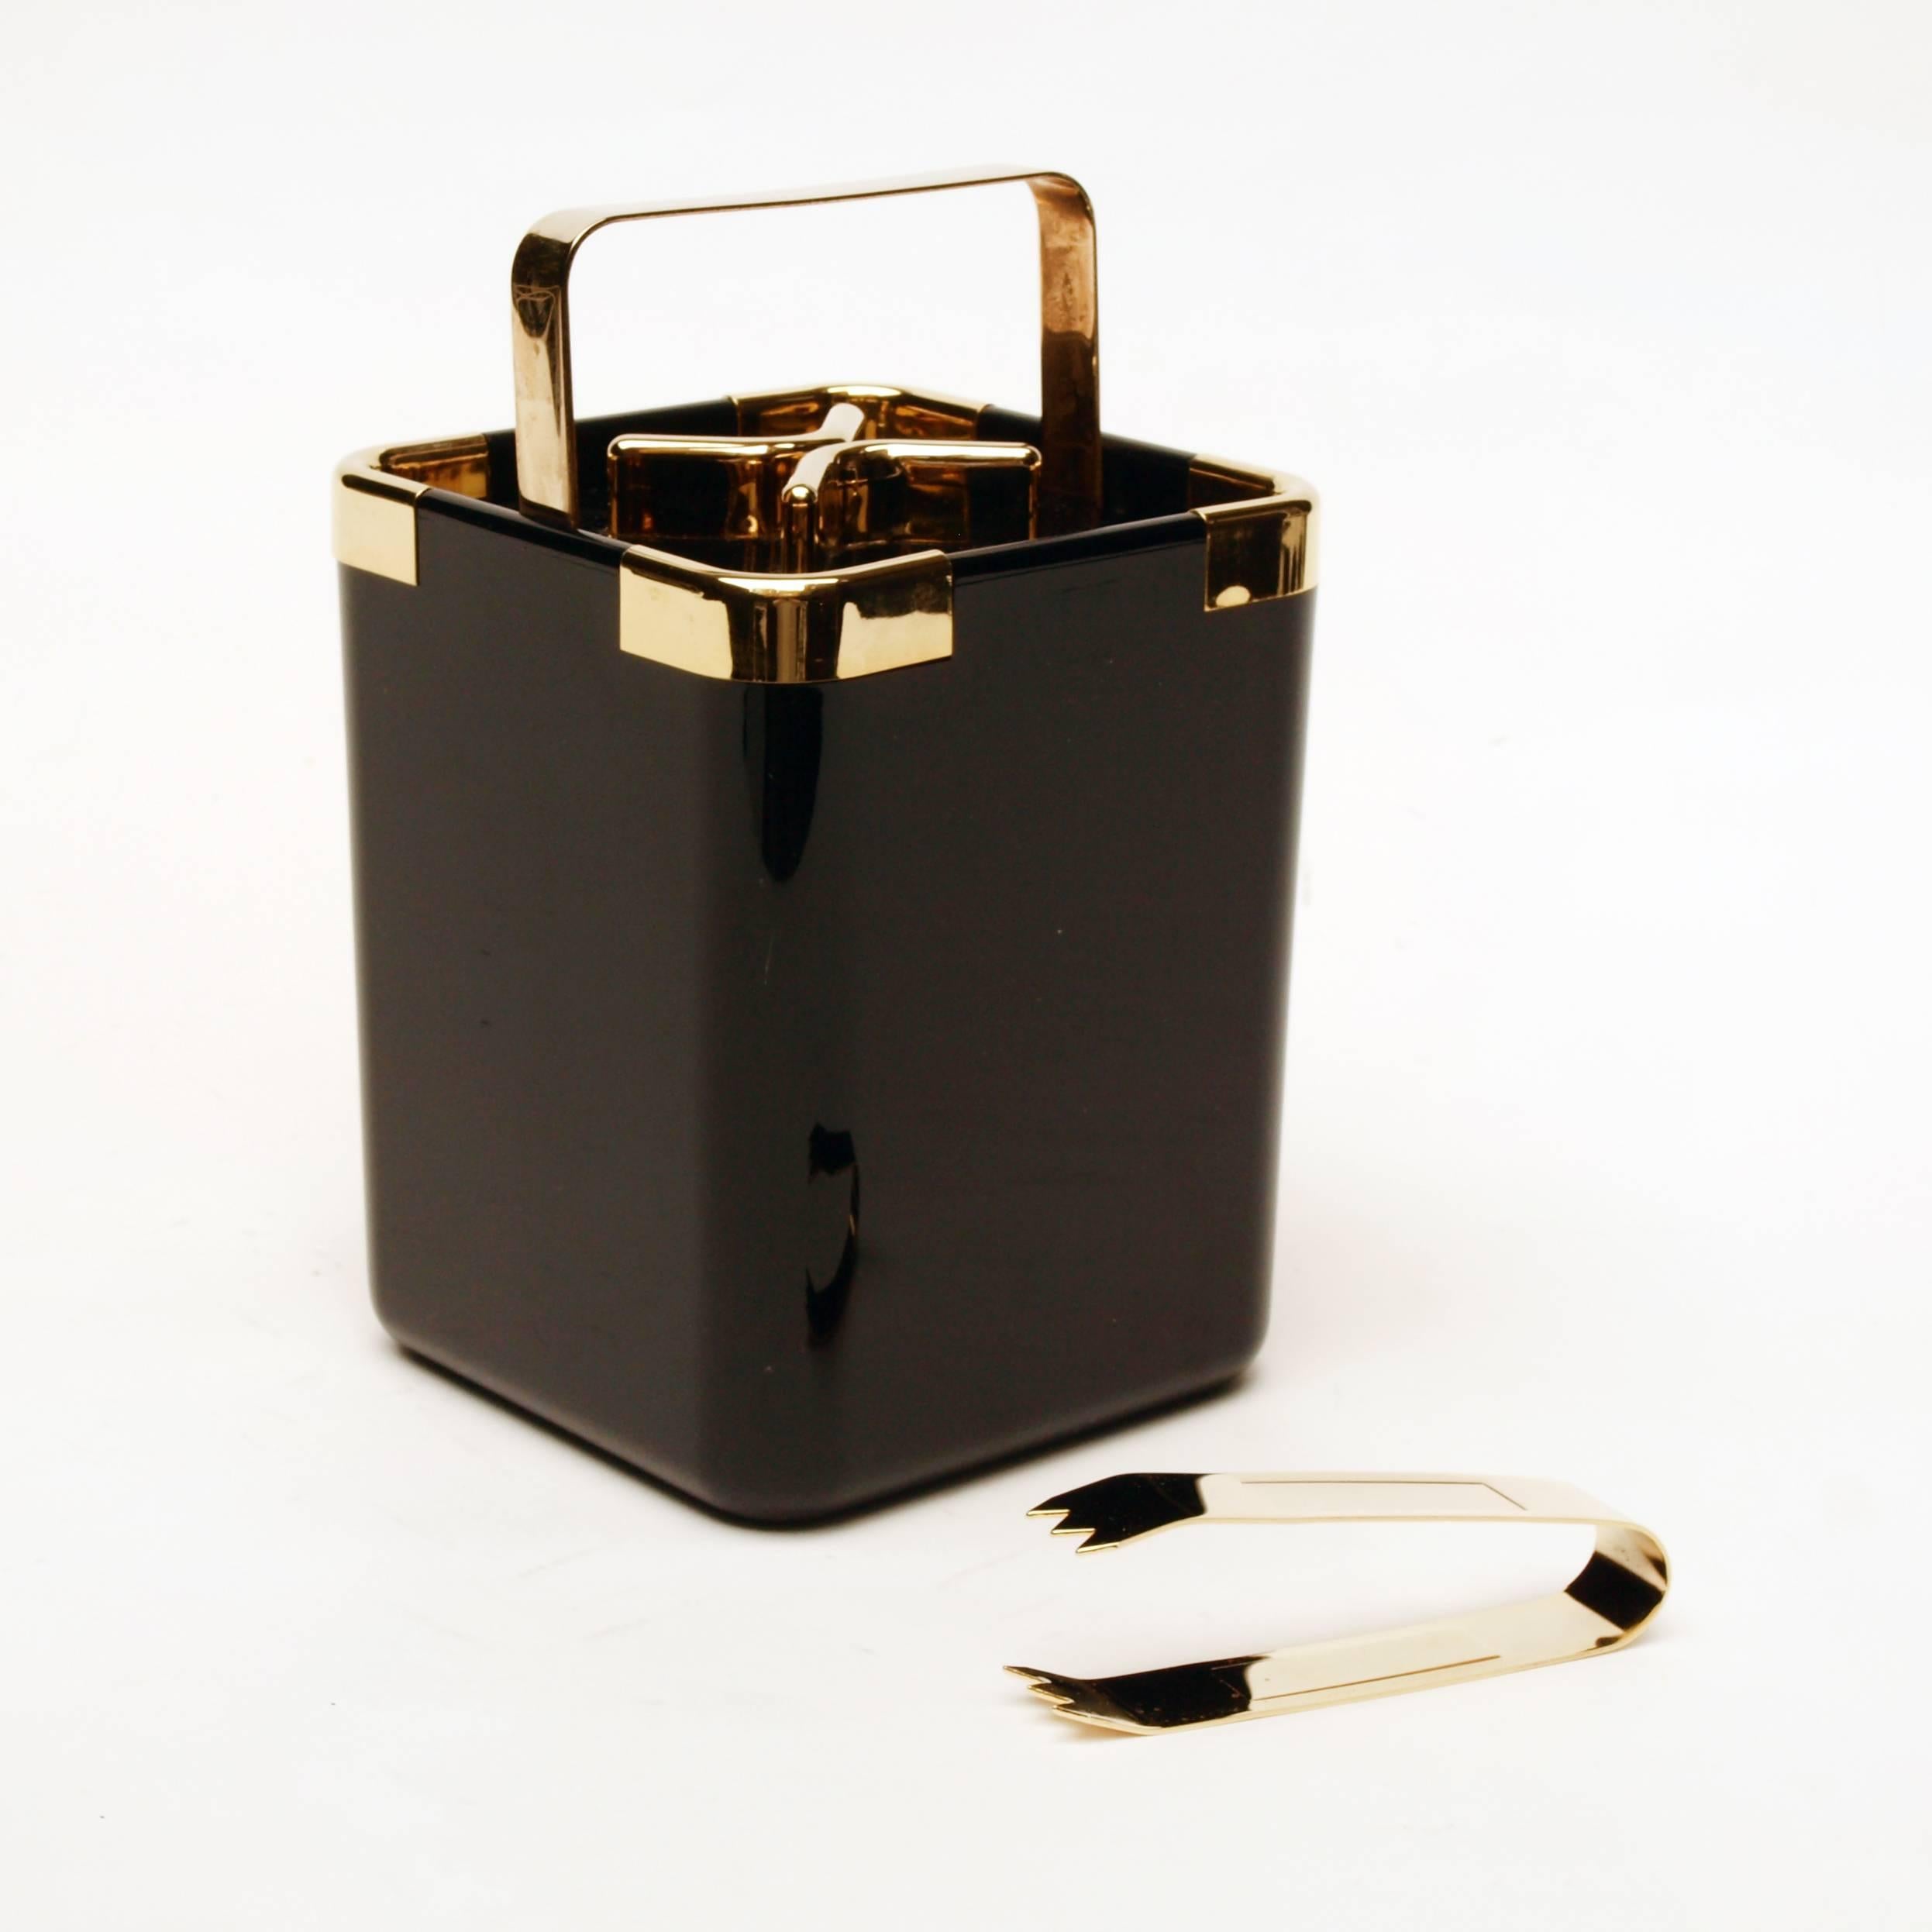 A glossy black and gold ice bucket dating from the late 1970s-early 1980s, with a folding brass handle and brass ice tongs. The condition is absolutely stunning as if never used. 

